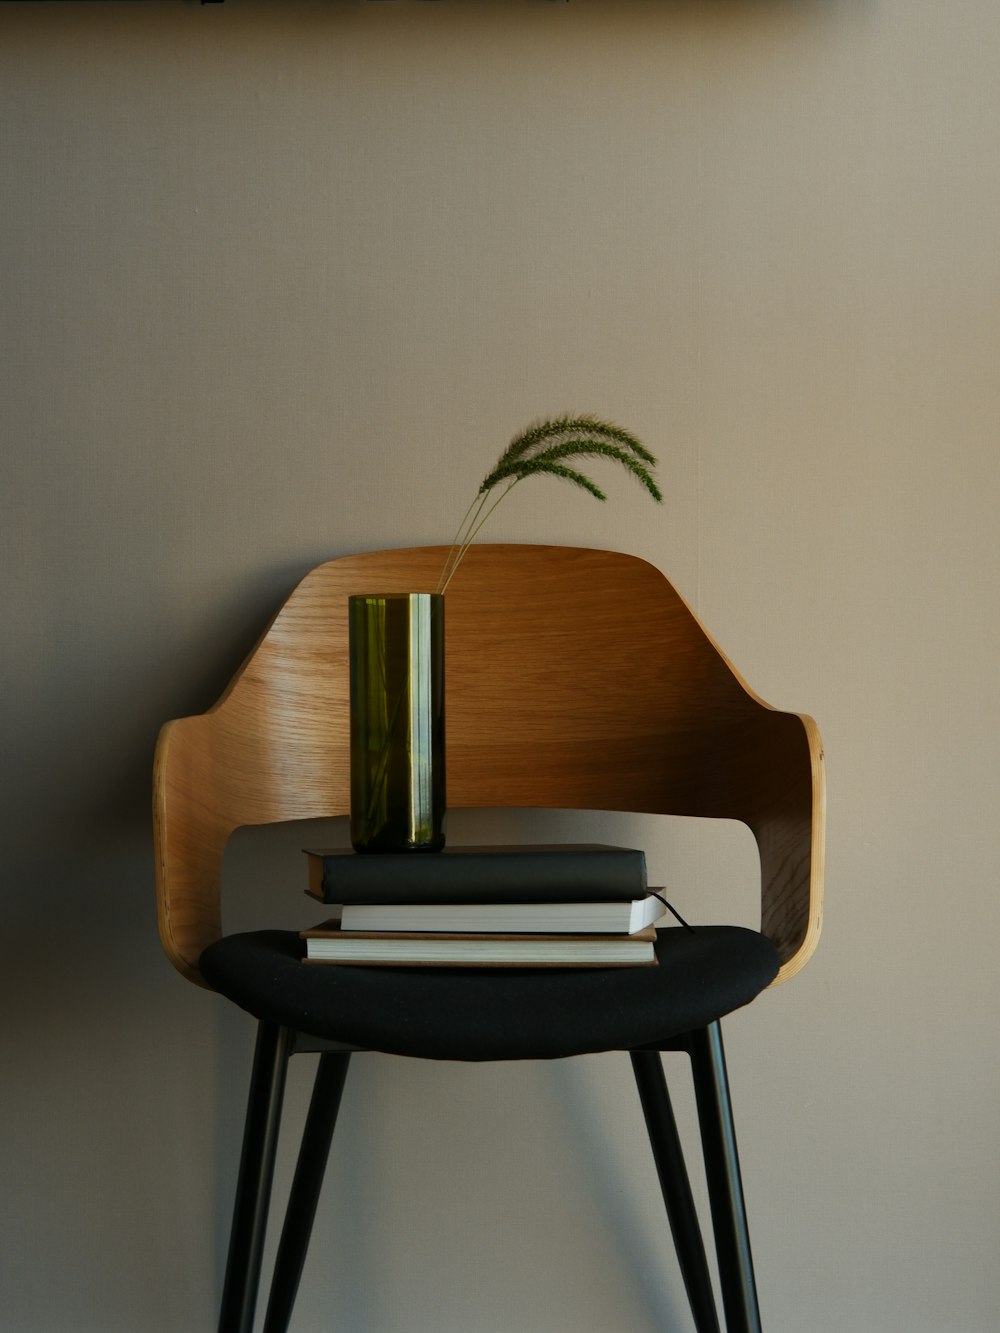 a wooden chair with a plant on top of it